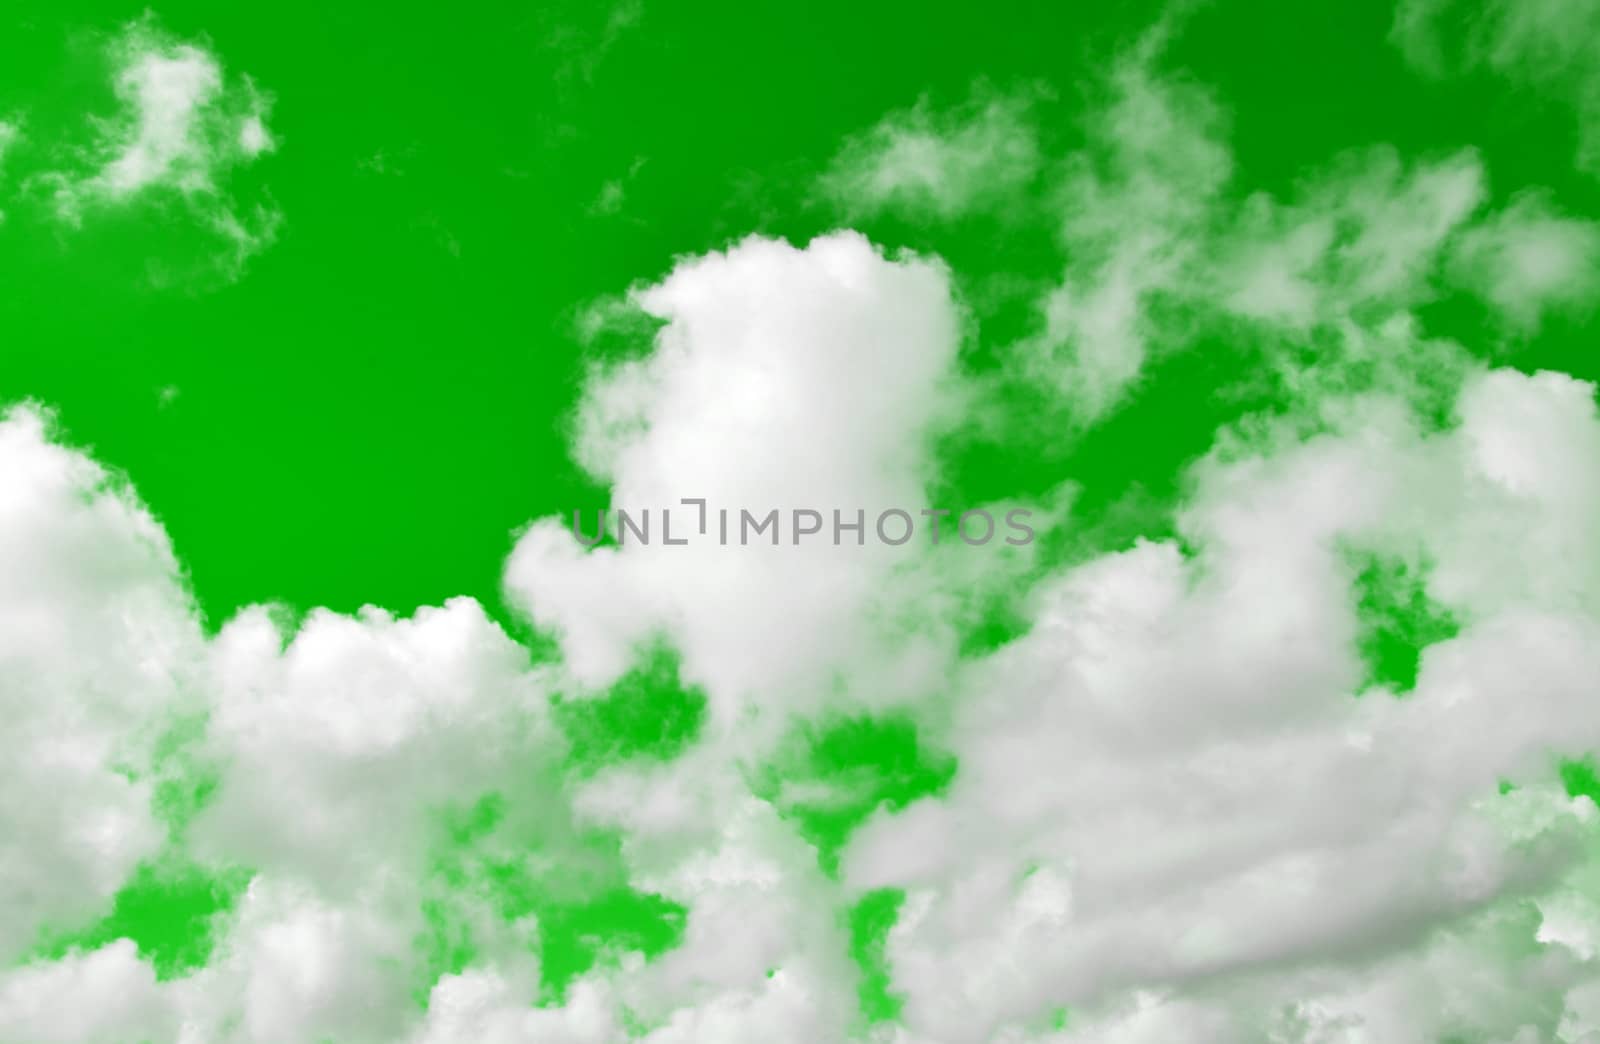 Clouds on the green screen